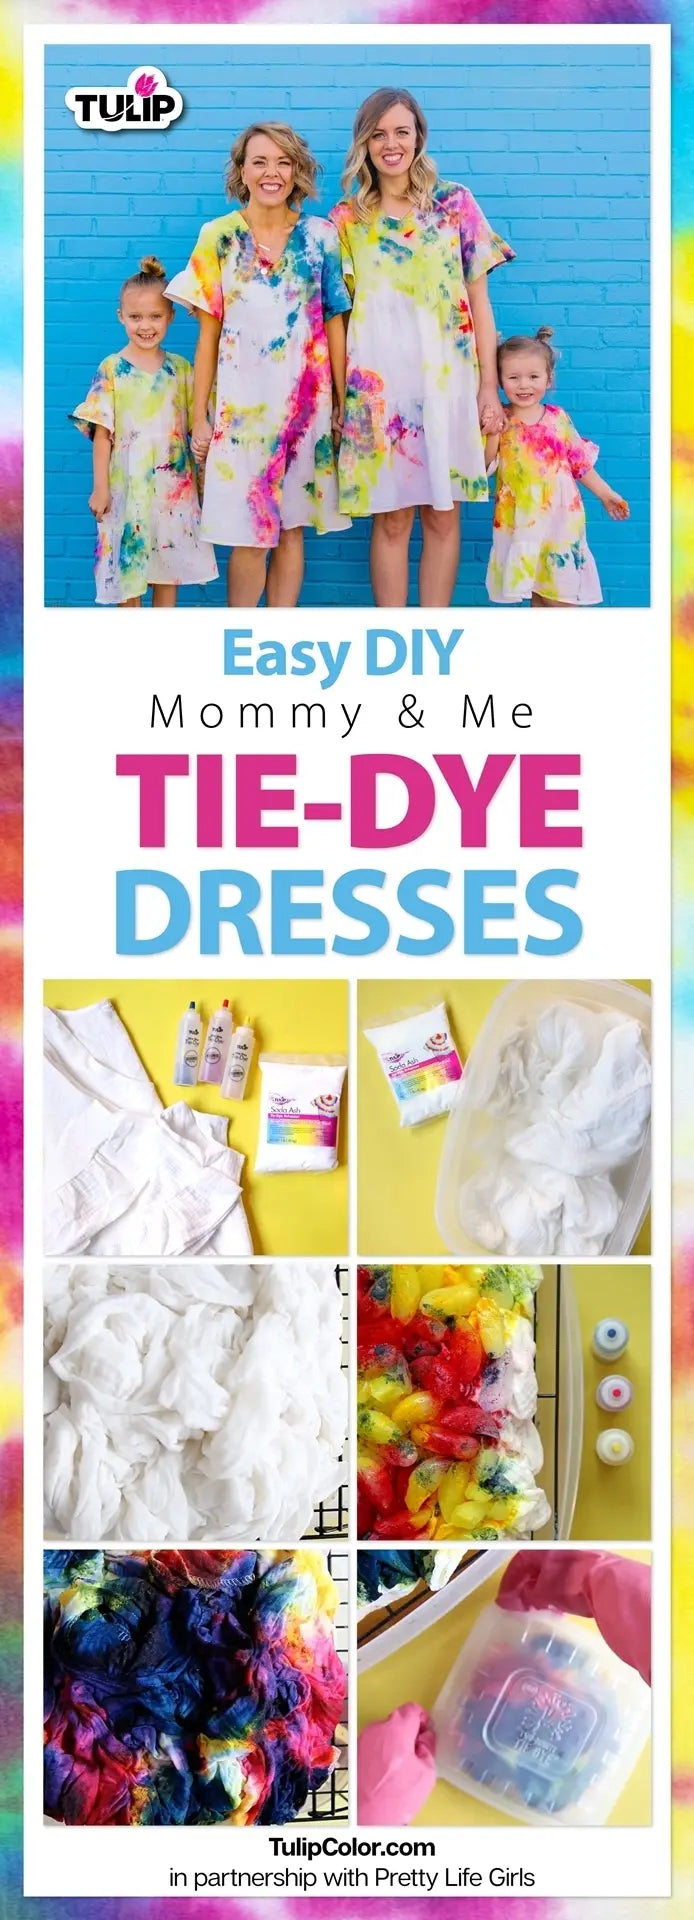 Mommy and Me Tie-Dye Dresses